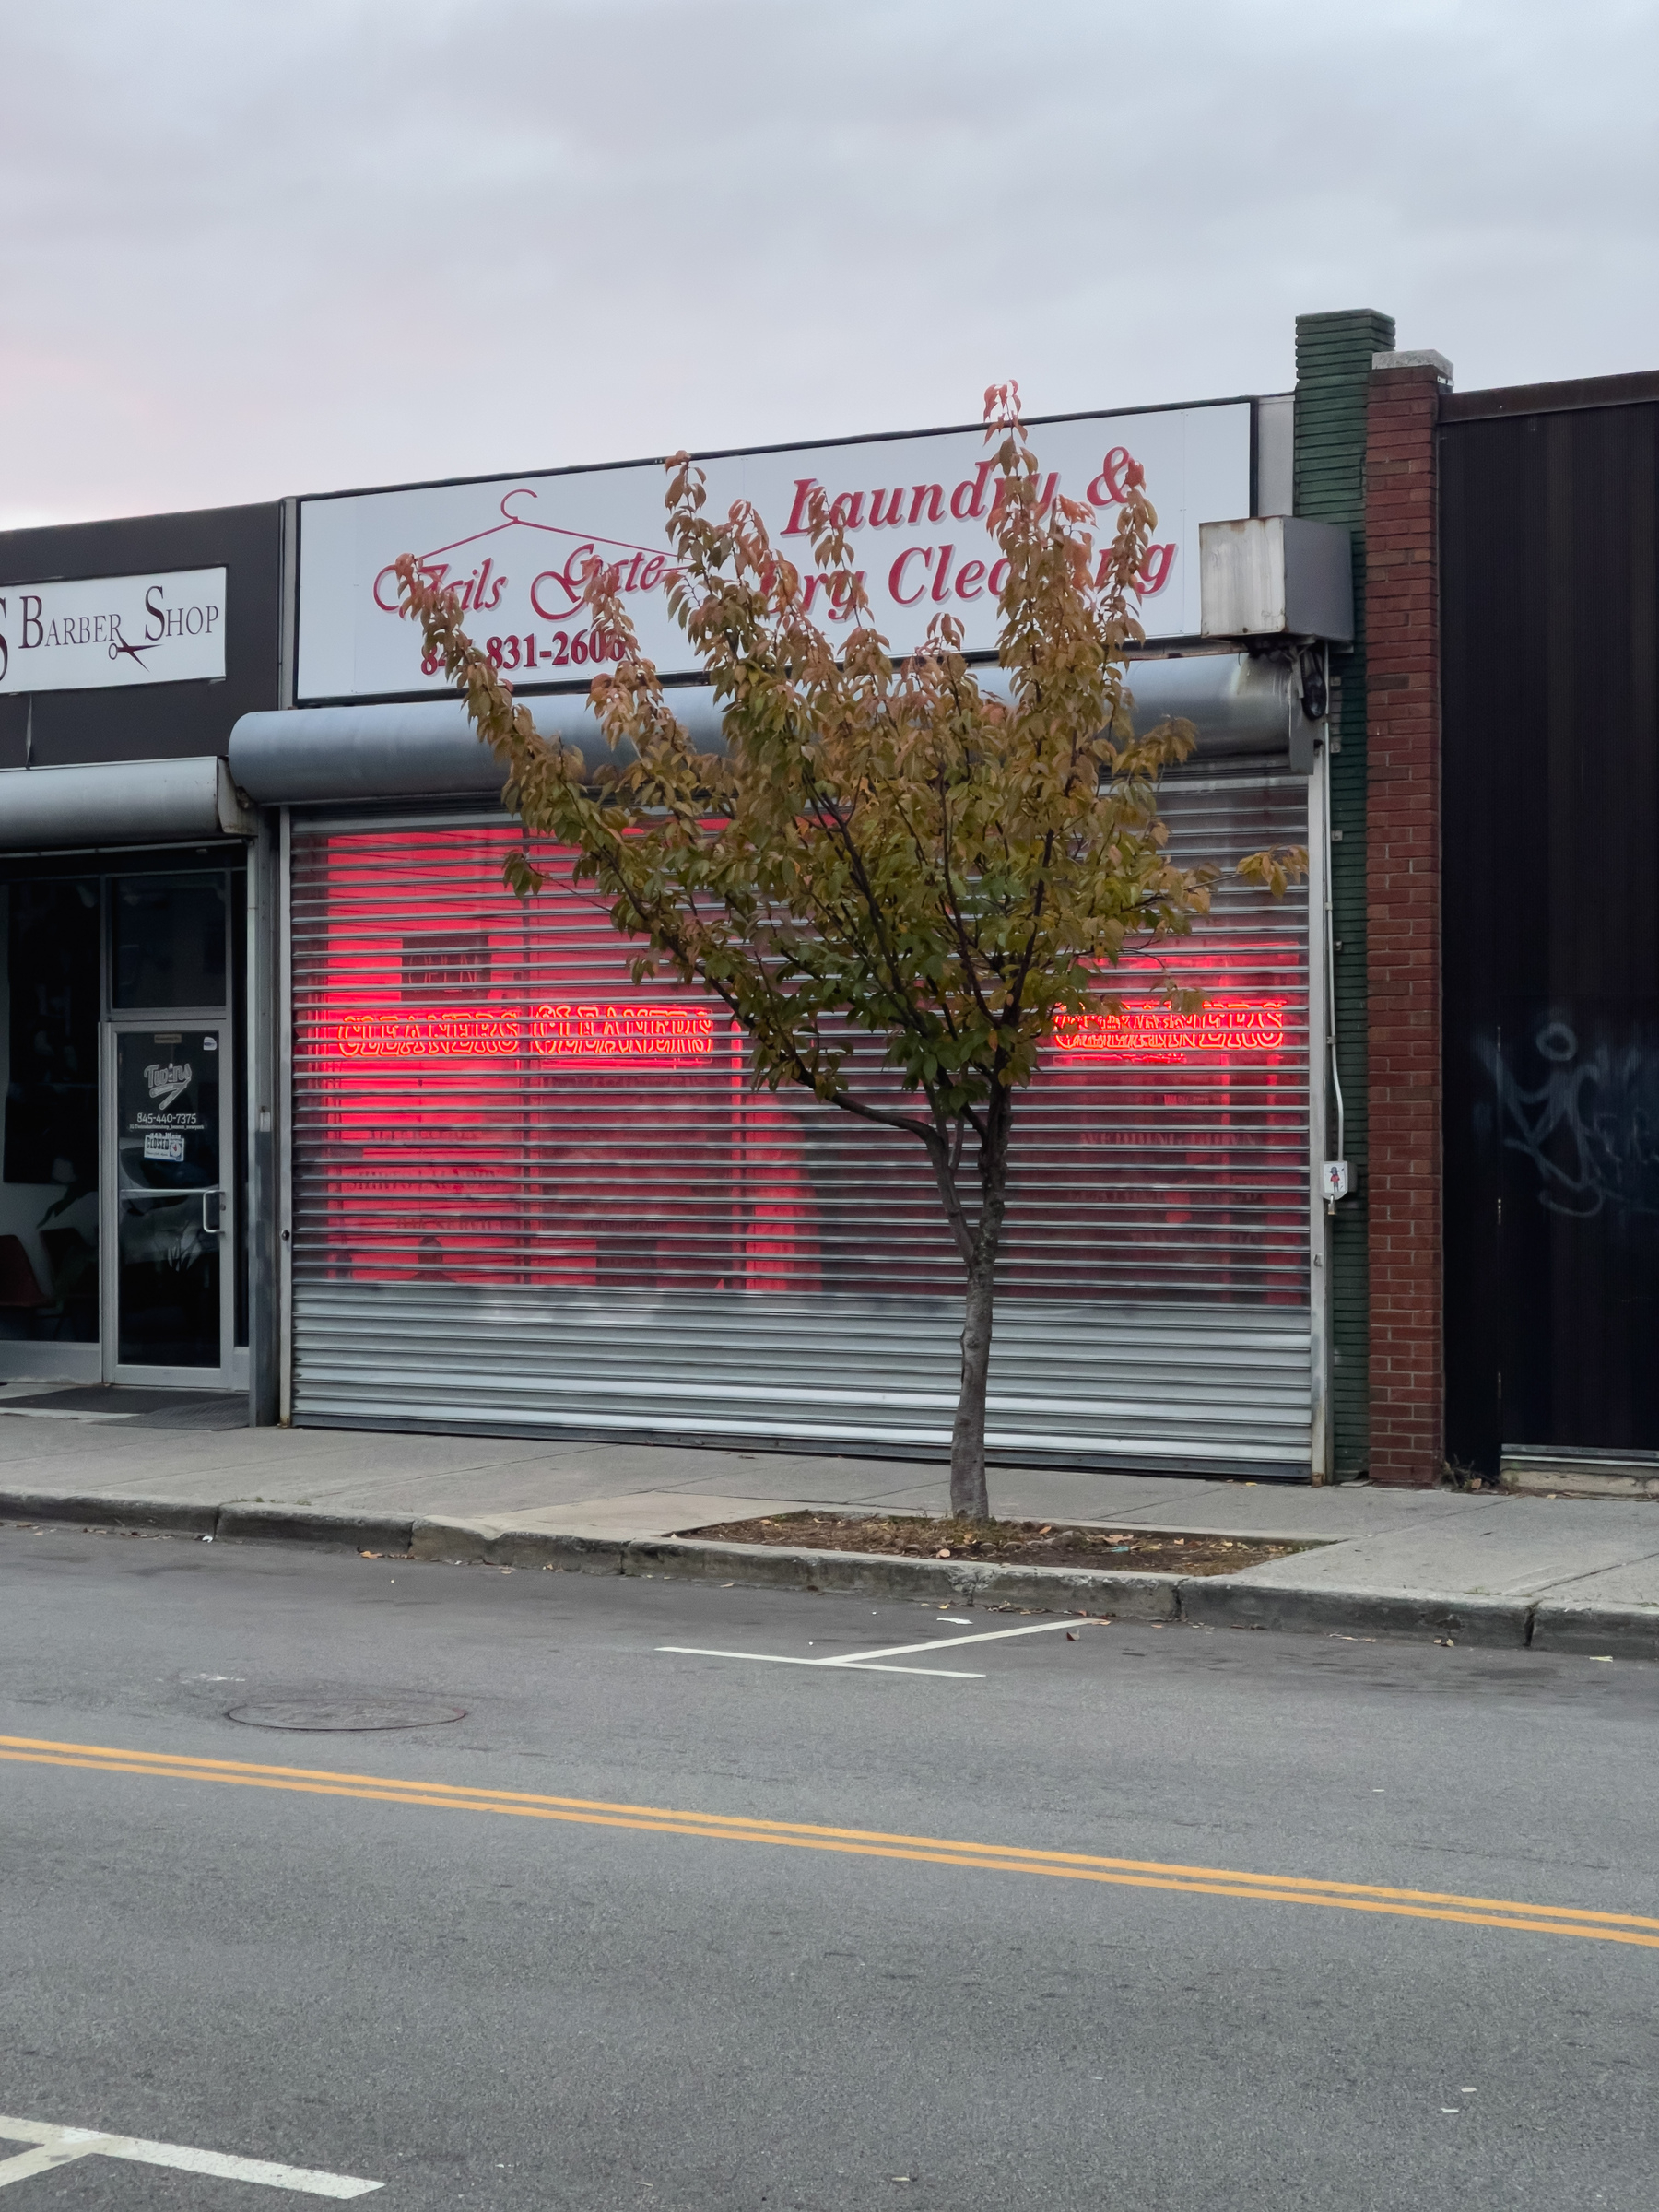 Laundry and dry cleaners storefront with security gate screen lowered and neon signage visible thorough the screen and single street tree in front.